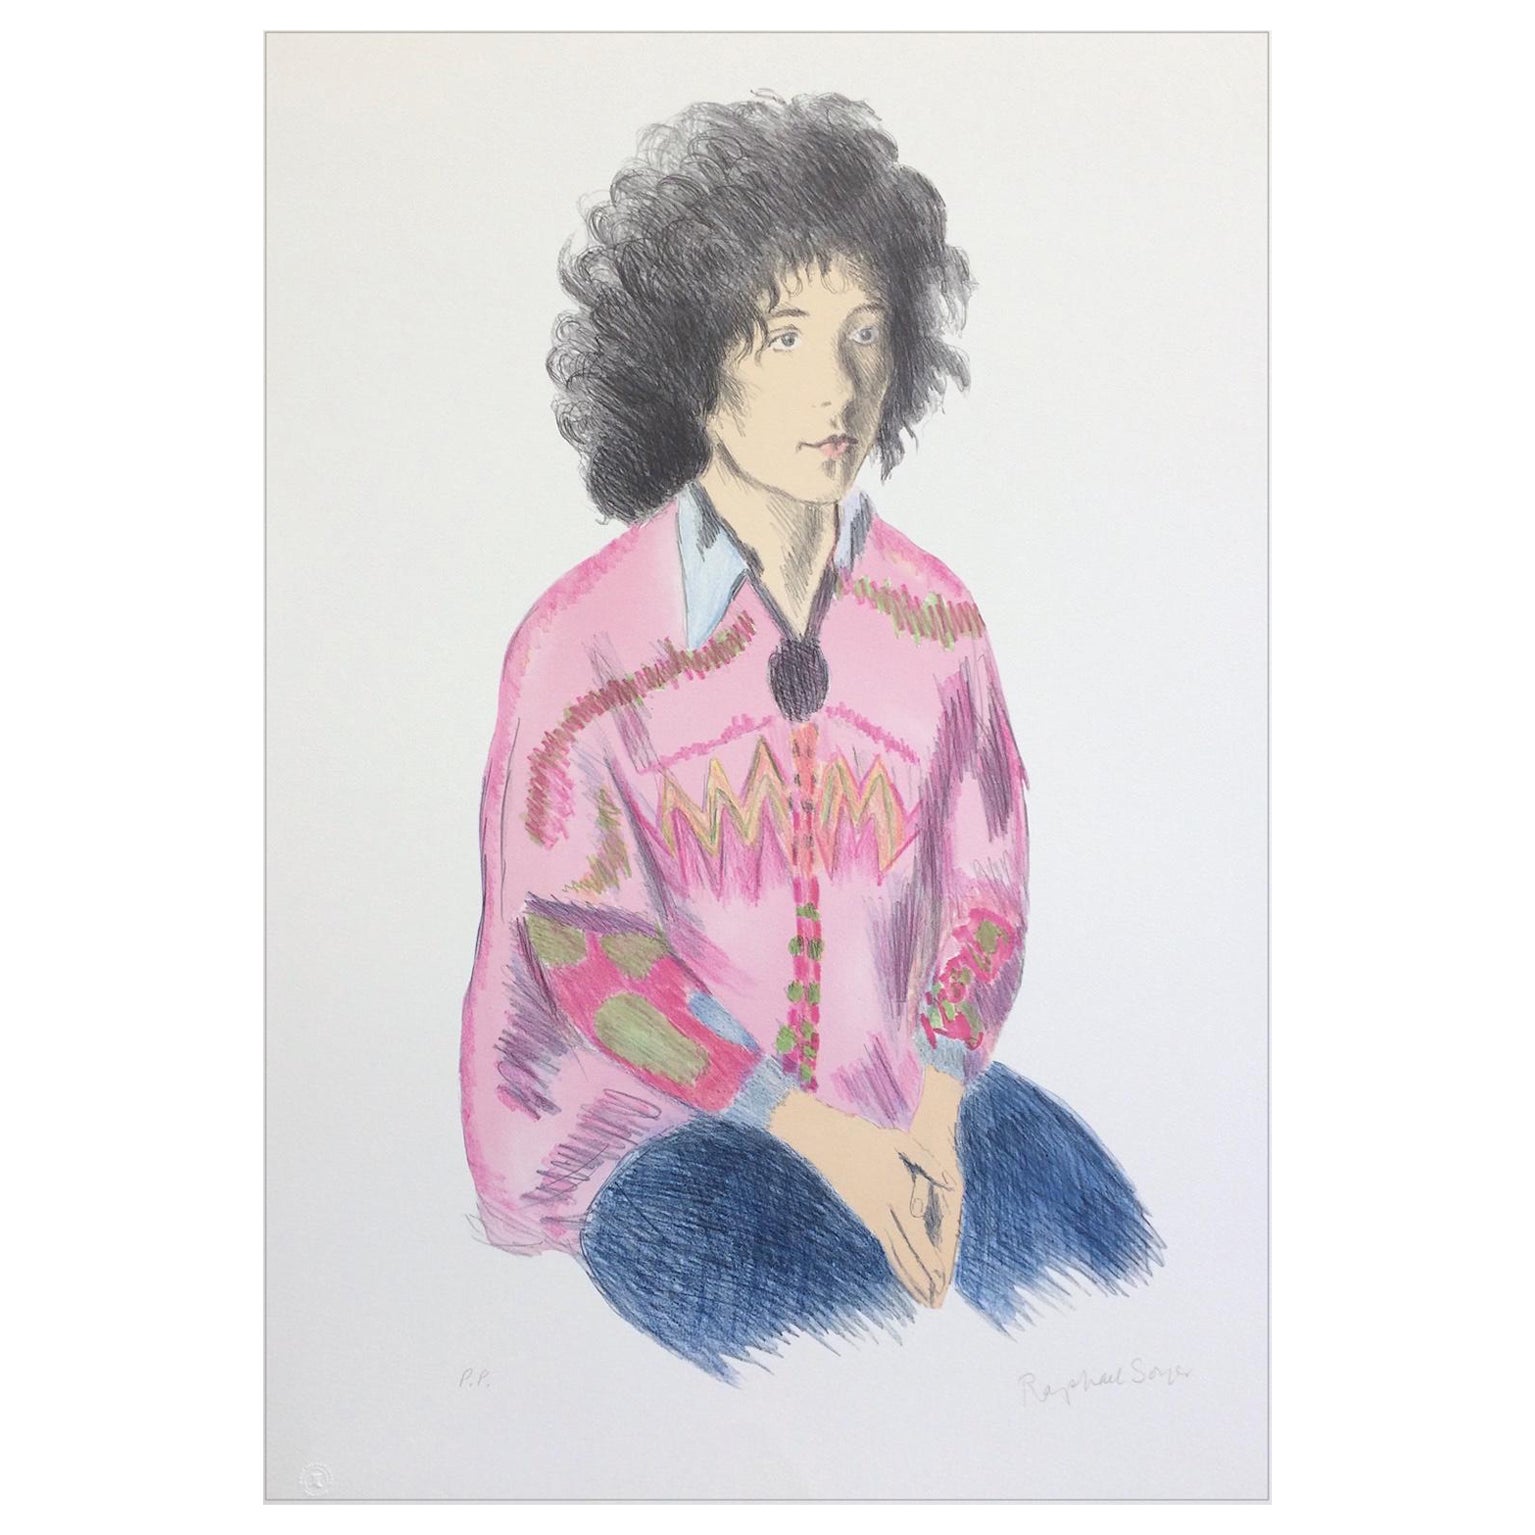 Raphael Soyer Portrait Print - Portrait of Liz, Signed Lithograph, Seated Woman Fluffy Hair, Pink Tunic, Jeans